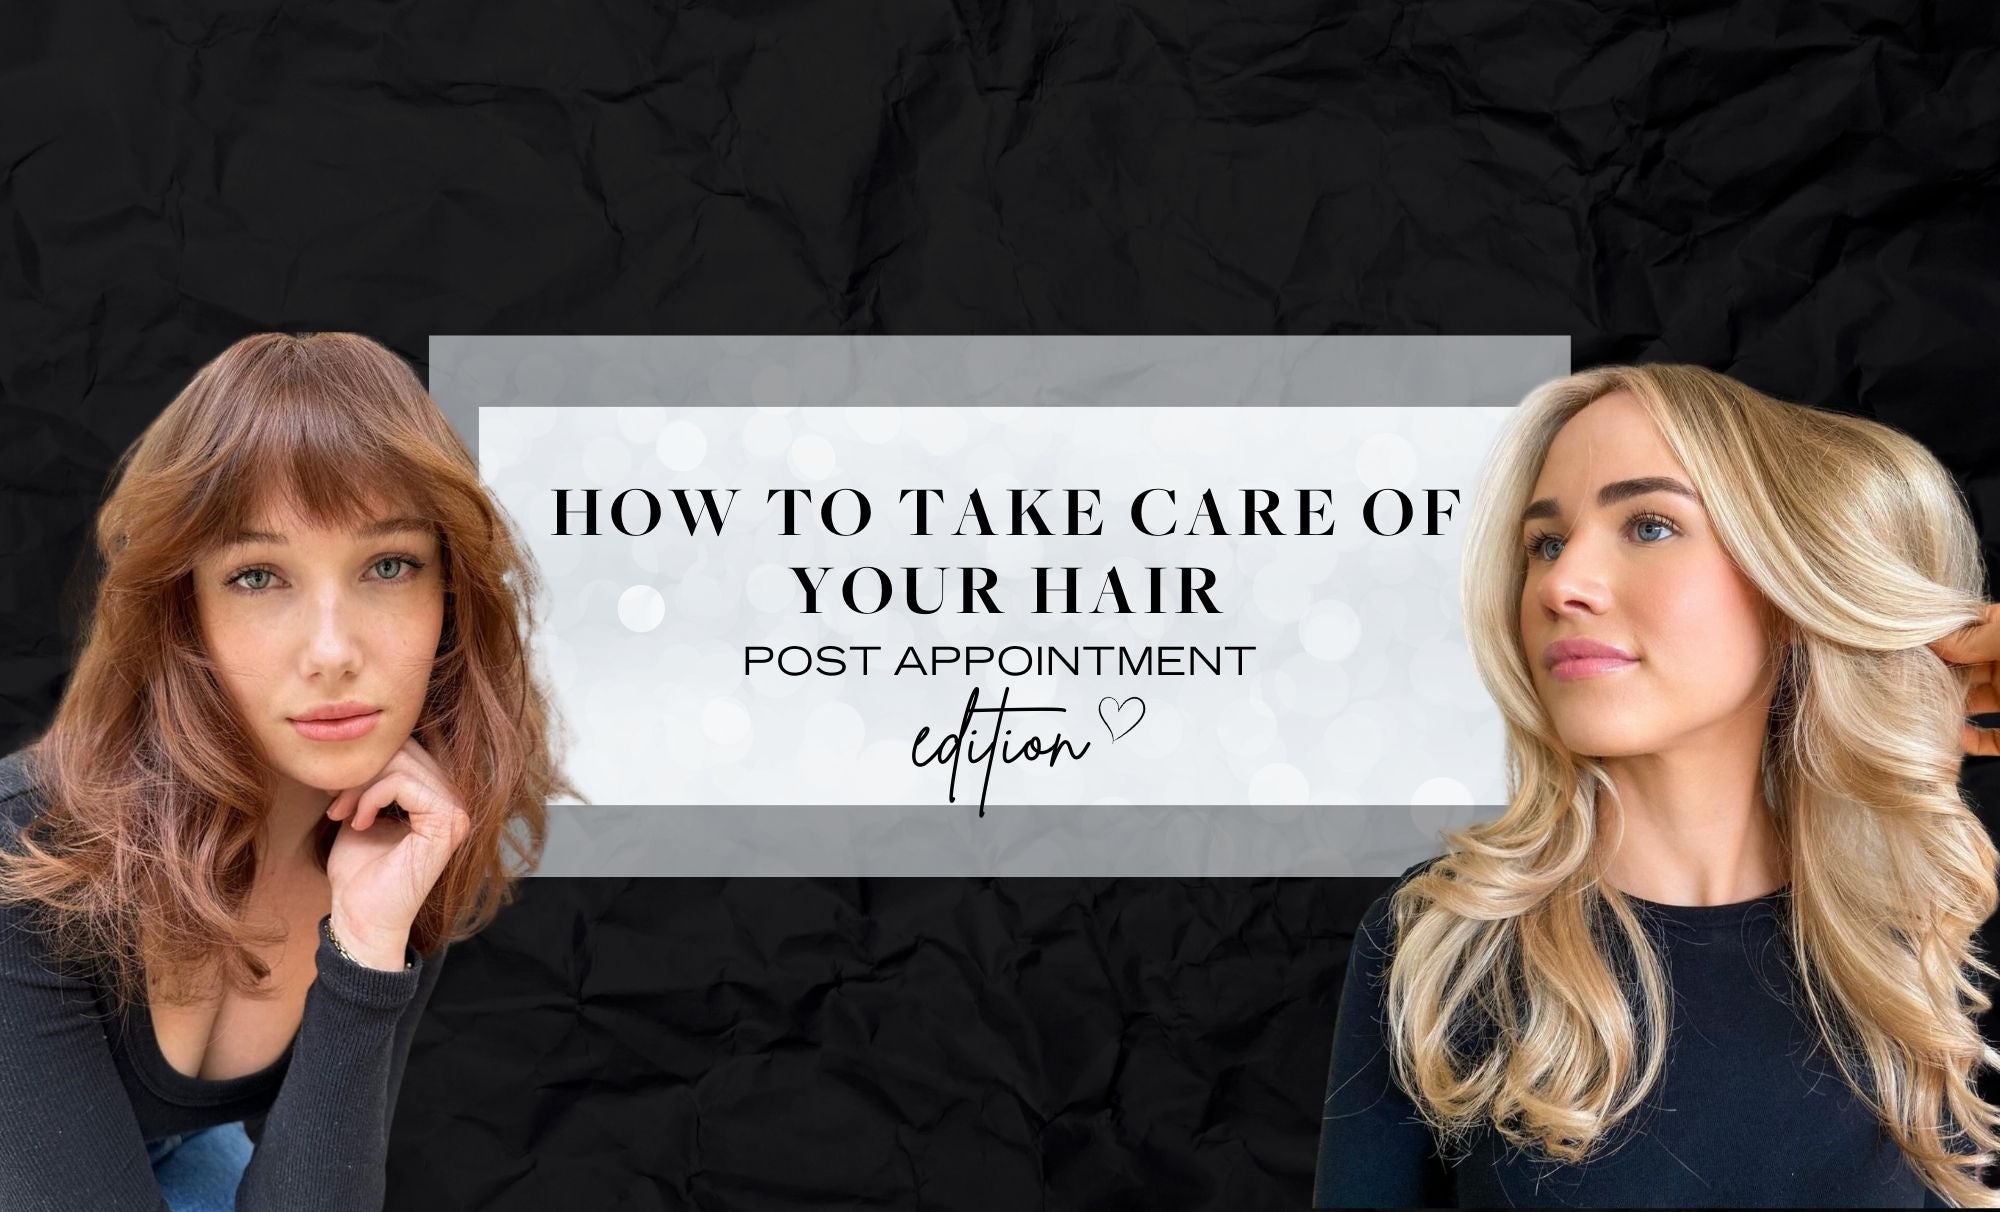 How To Take Care Of Your Hair - Post Appointment Edition 🖤 - Oscar Oscar Salons